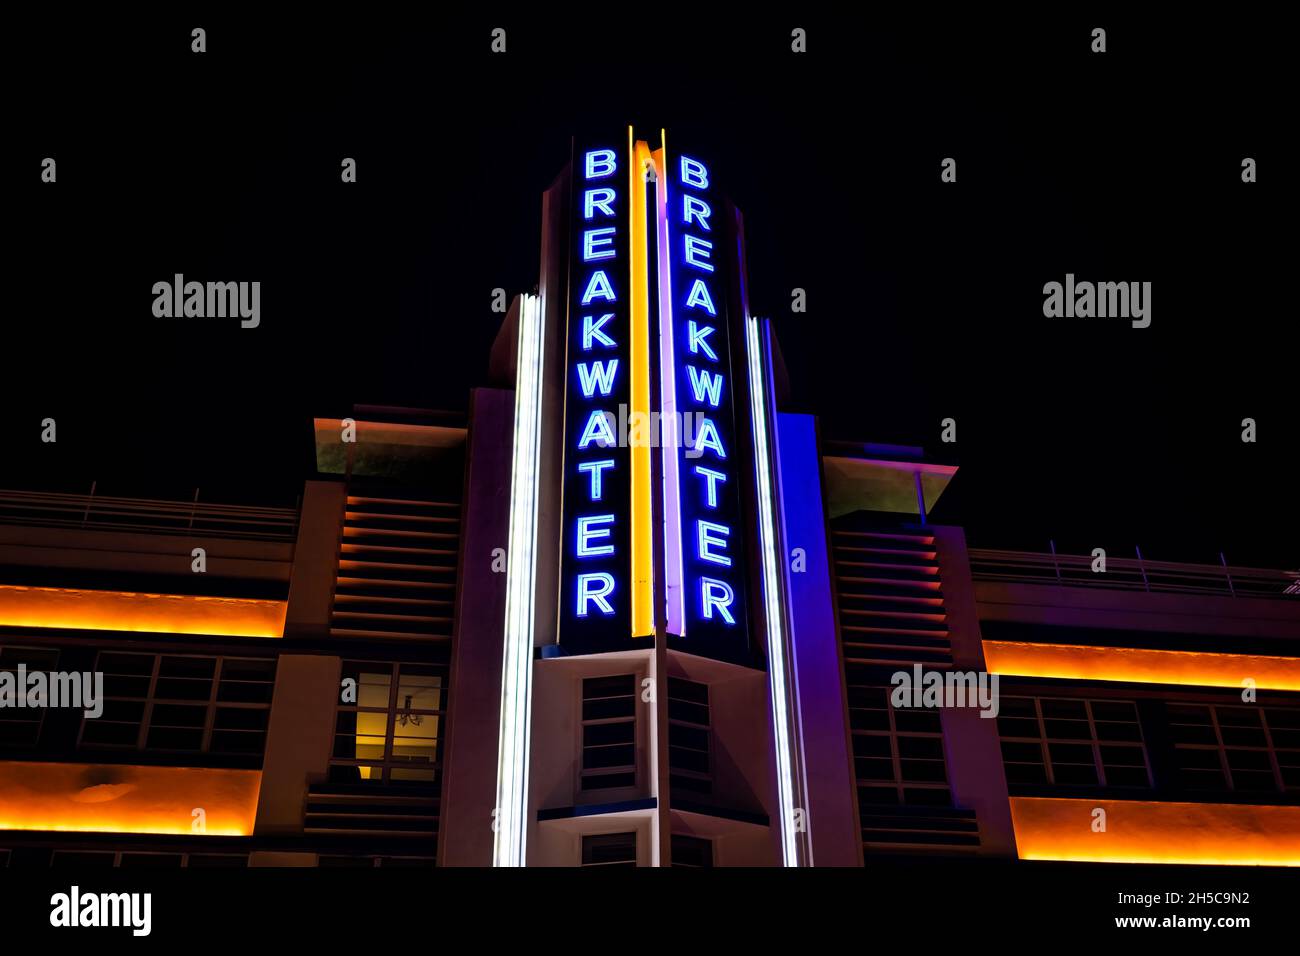 Miami Beach, USA - January 20, 2021: Looking up low angle view on art deco district at night with neon blue light sign of Breakwater Hotel facade in S Stock Photo